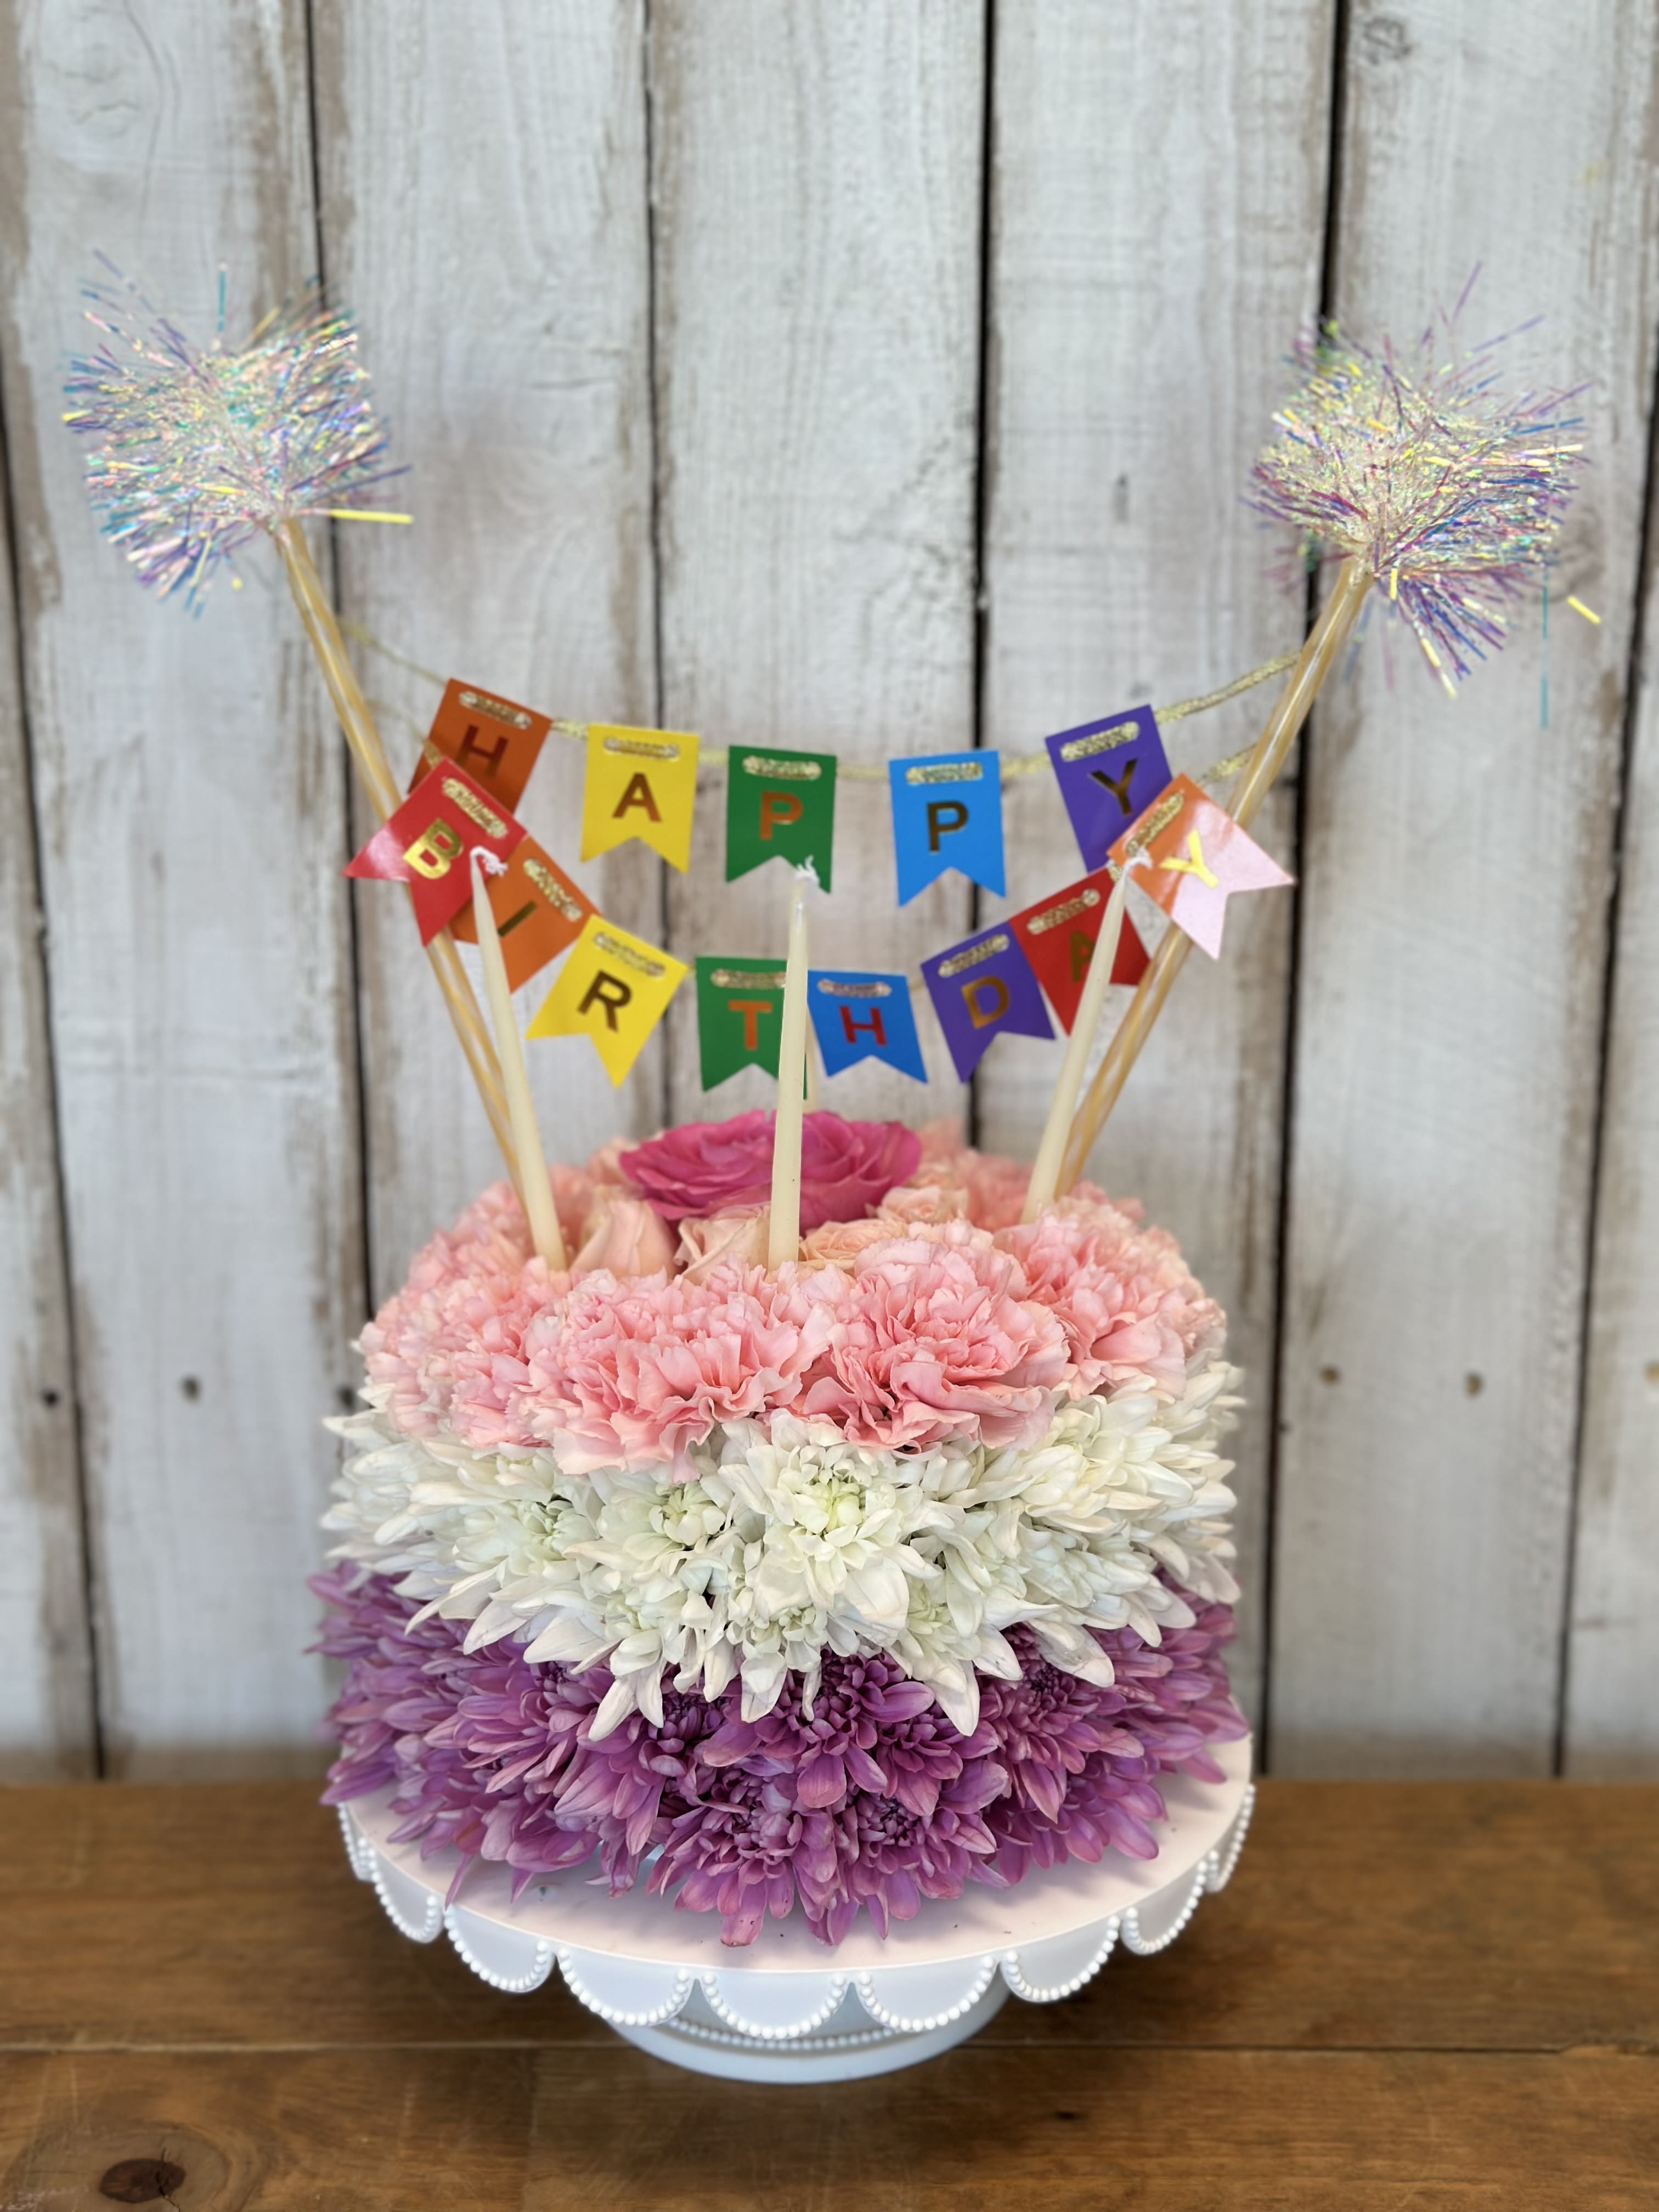 Happiest birthday  - Happiest birthday trending floral cake candles included fresh roses mums and carnations 